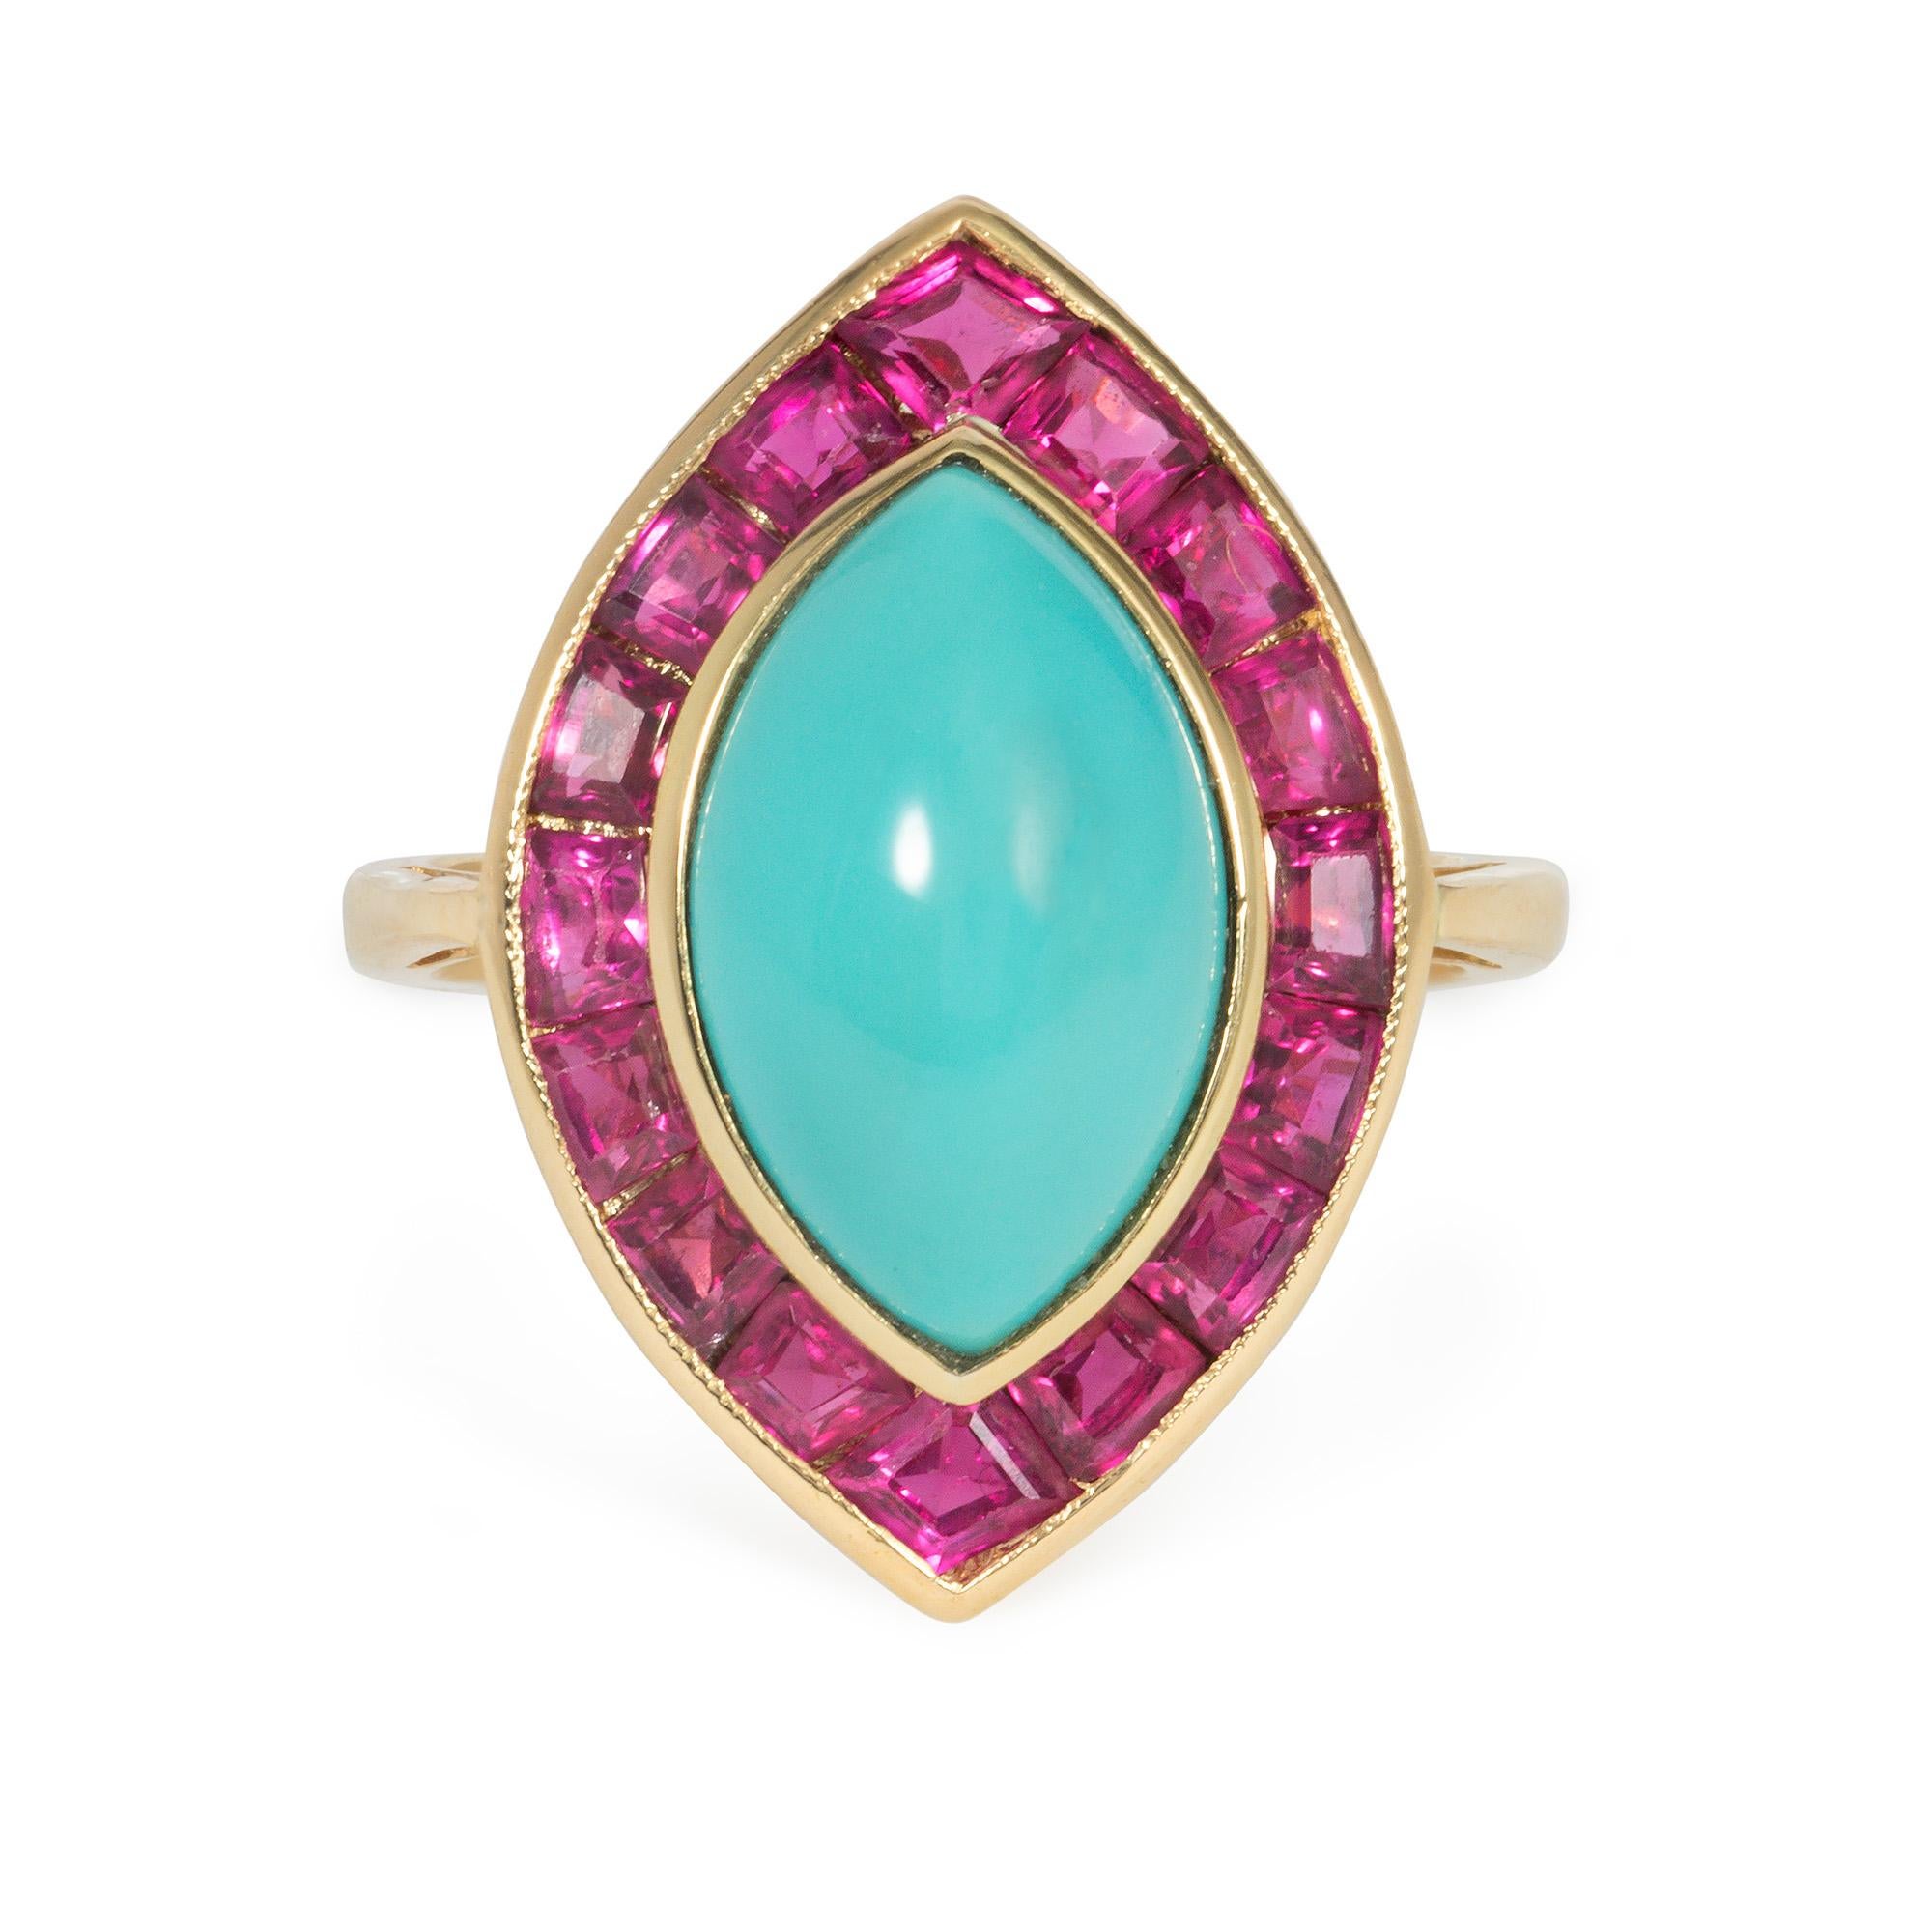 A mid-century ruby and turquoise ring comprised of a navette-shaped turquoise in a calibré ruby surround, in 18k gold. Indistinct #941?

Face-up dimensions: 7/8